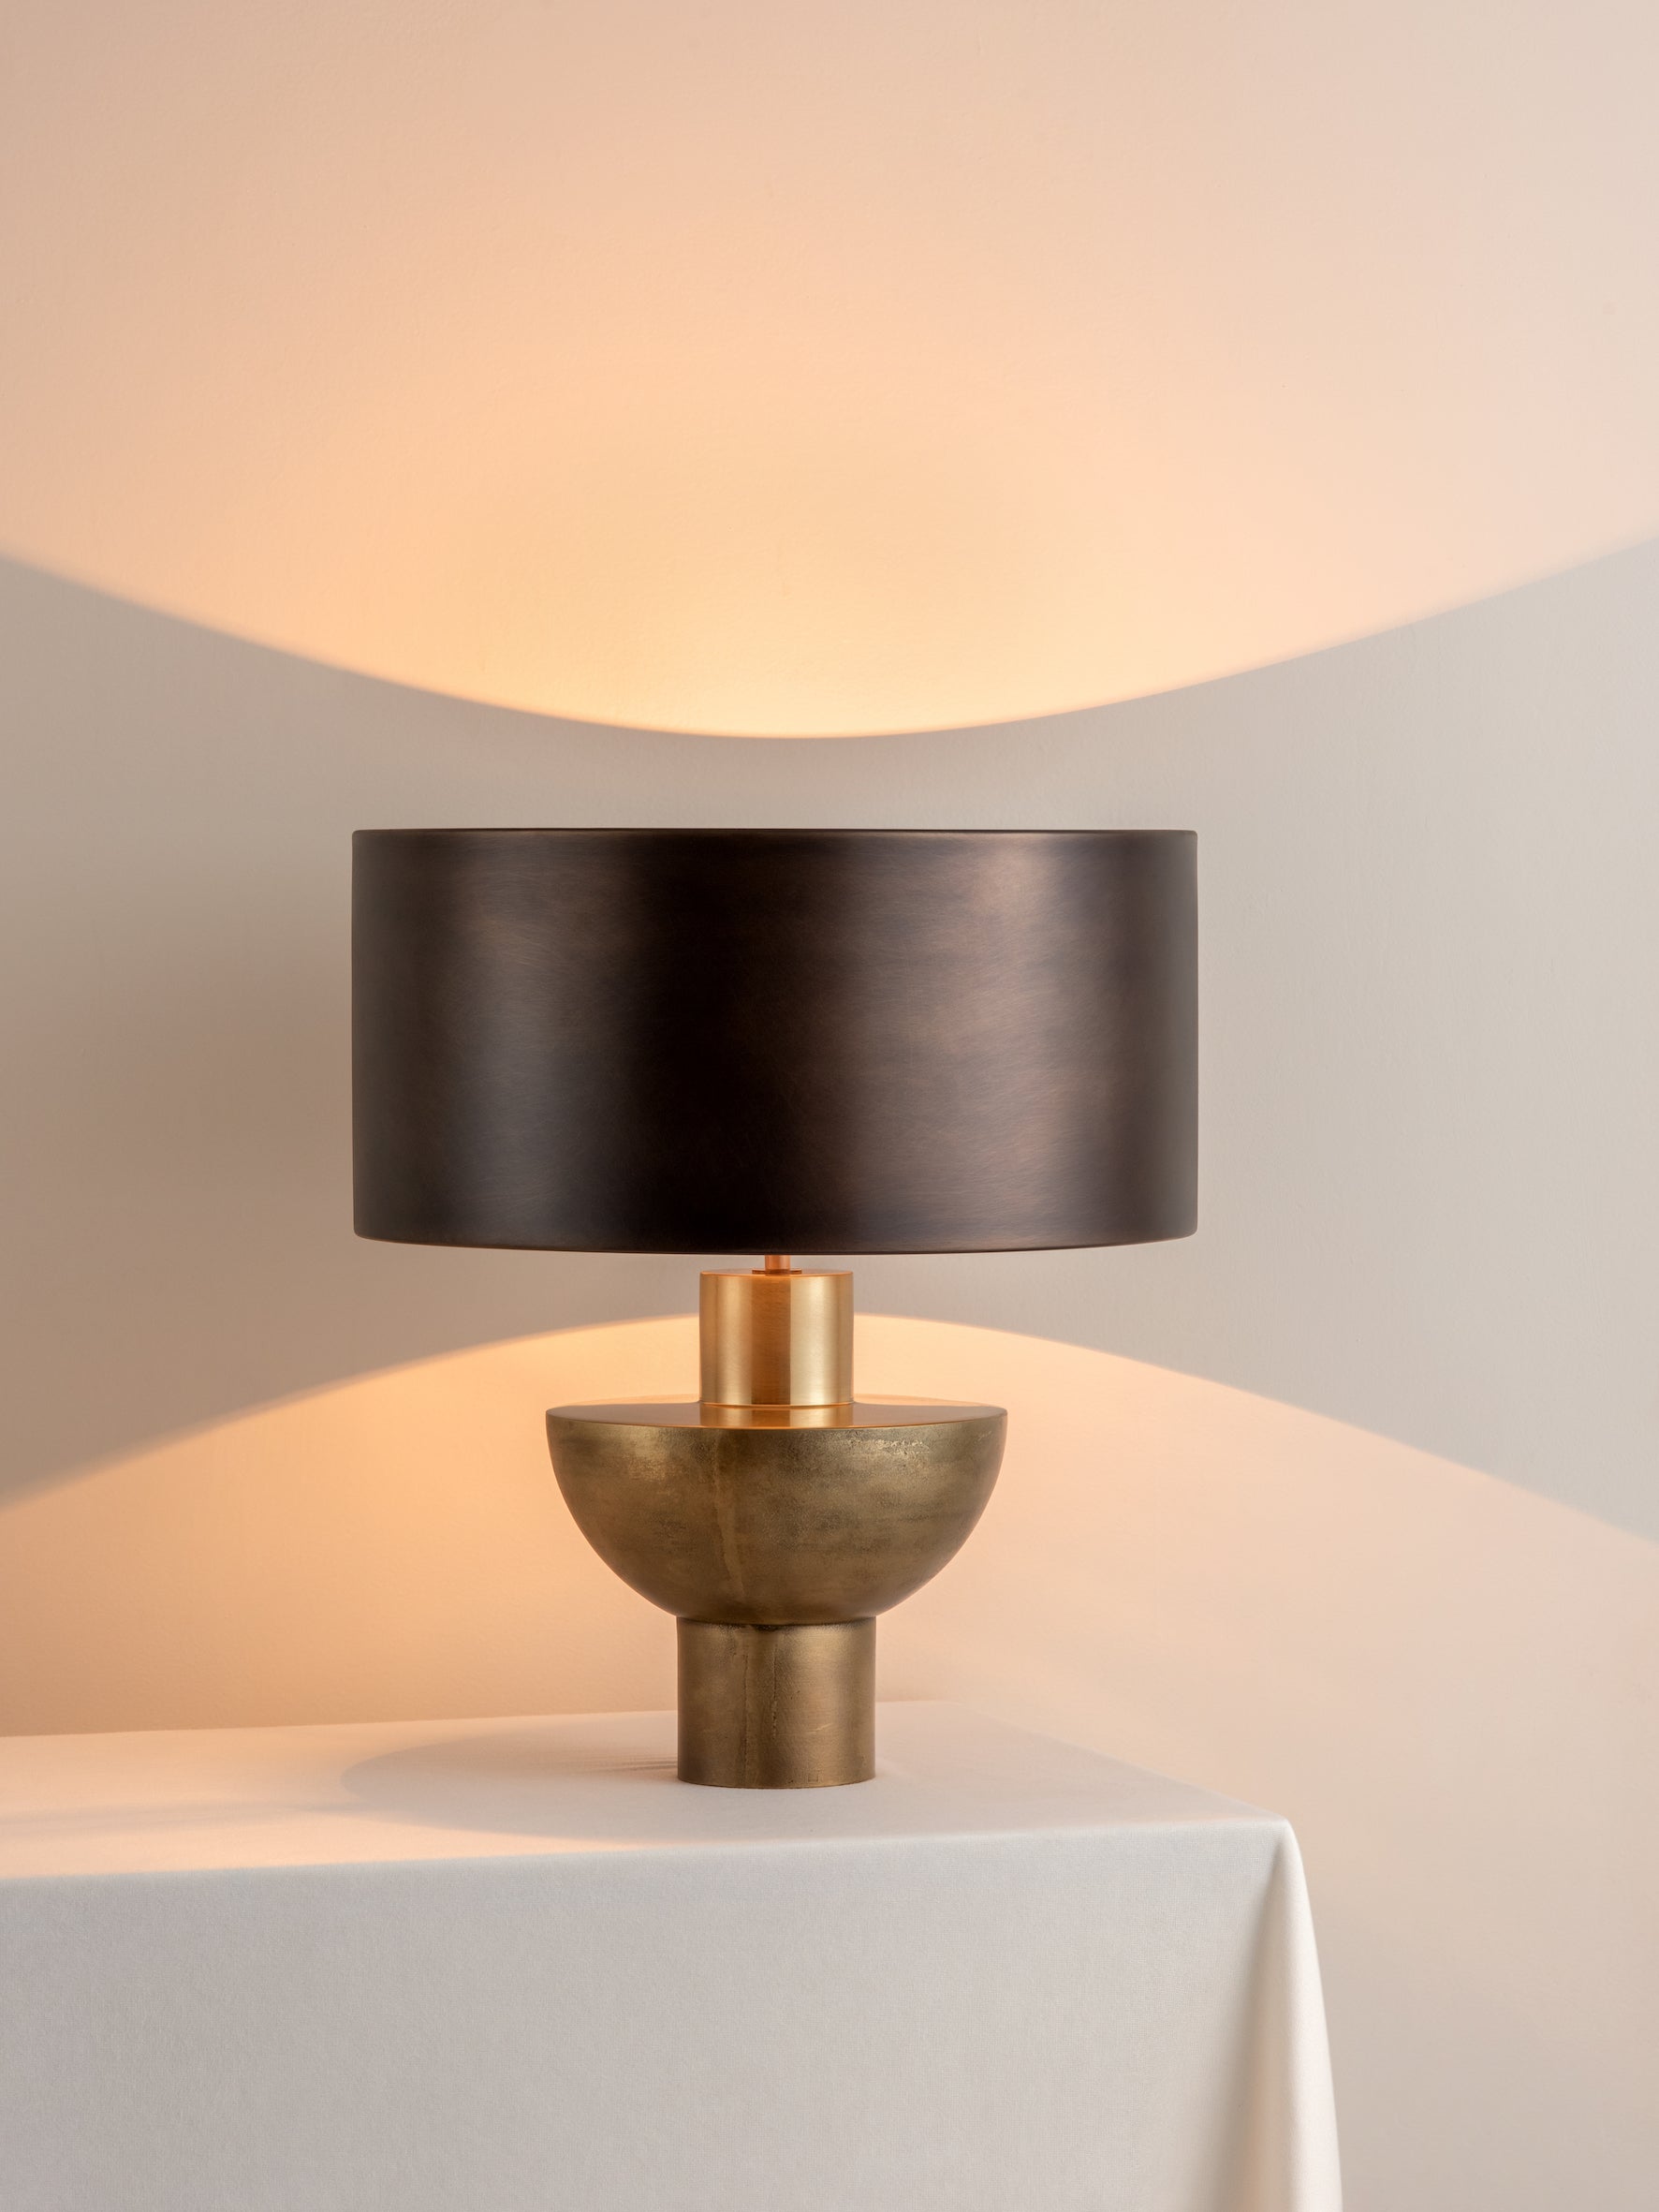 Editions brass lamp with + bronze shade, Table Lamp, £475, Lights & Lamps, Modern Designer Lighting